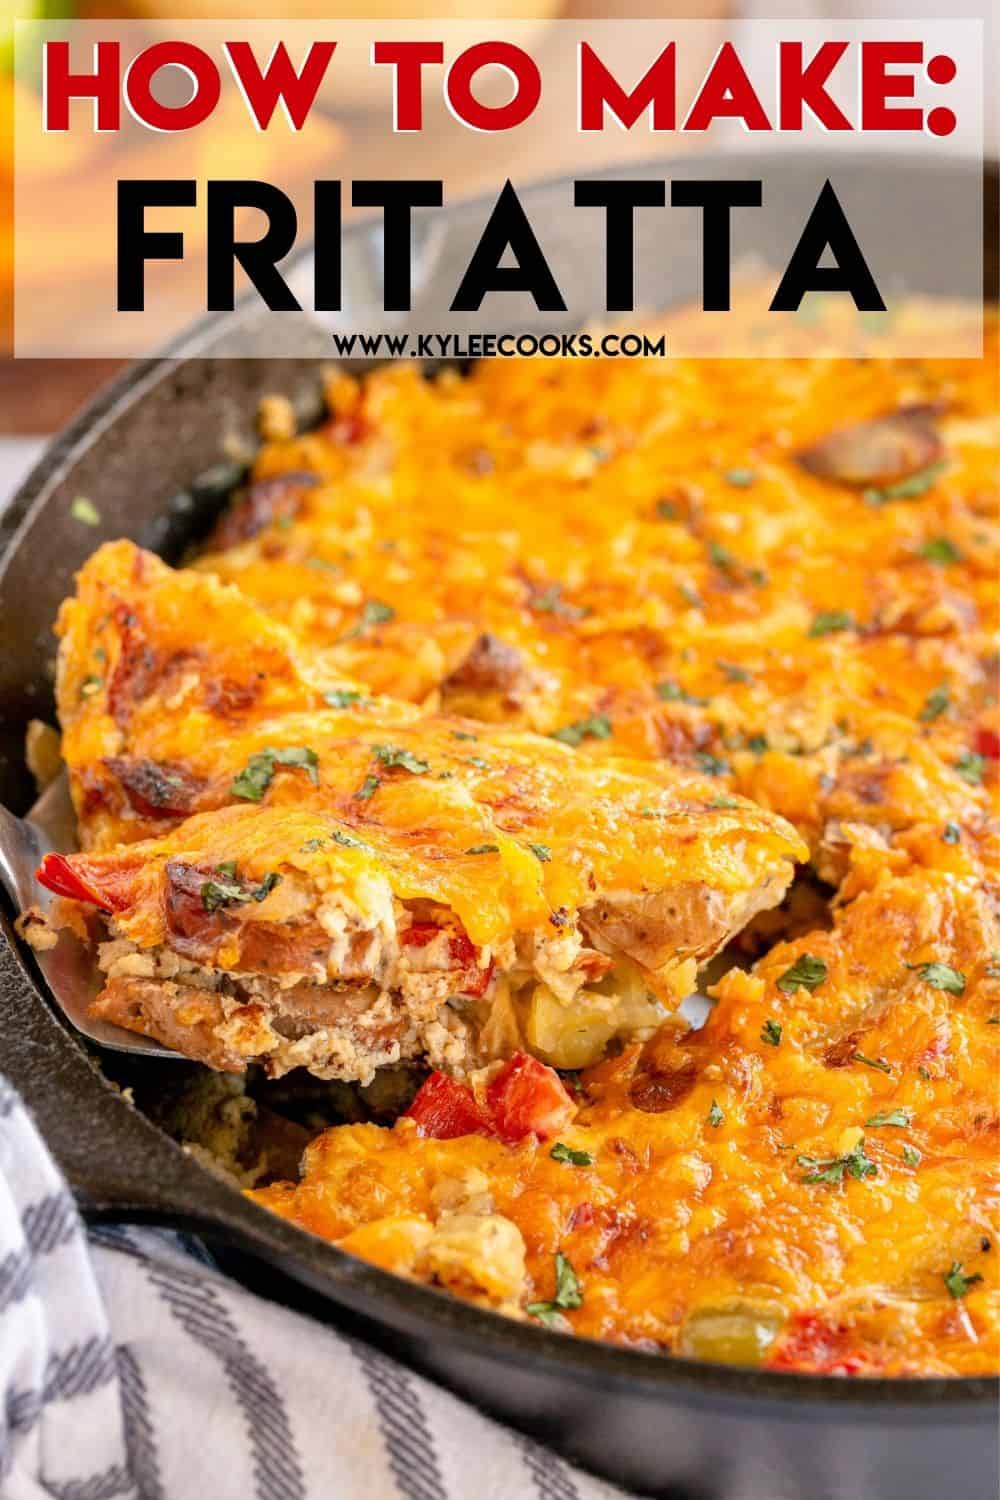 a frittata in a skillet with recipe name overlaid in text.